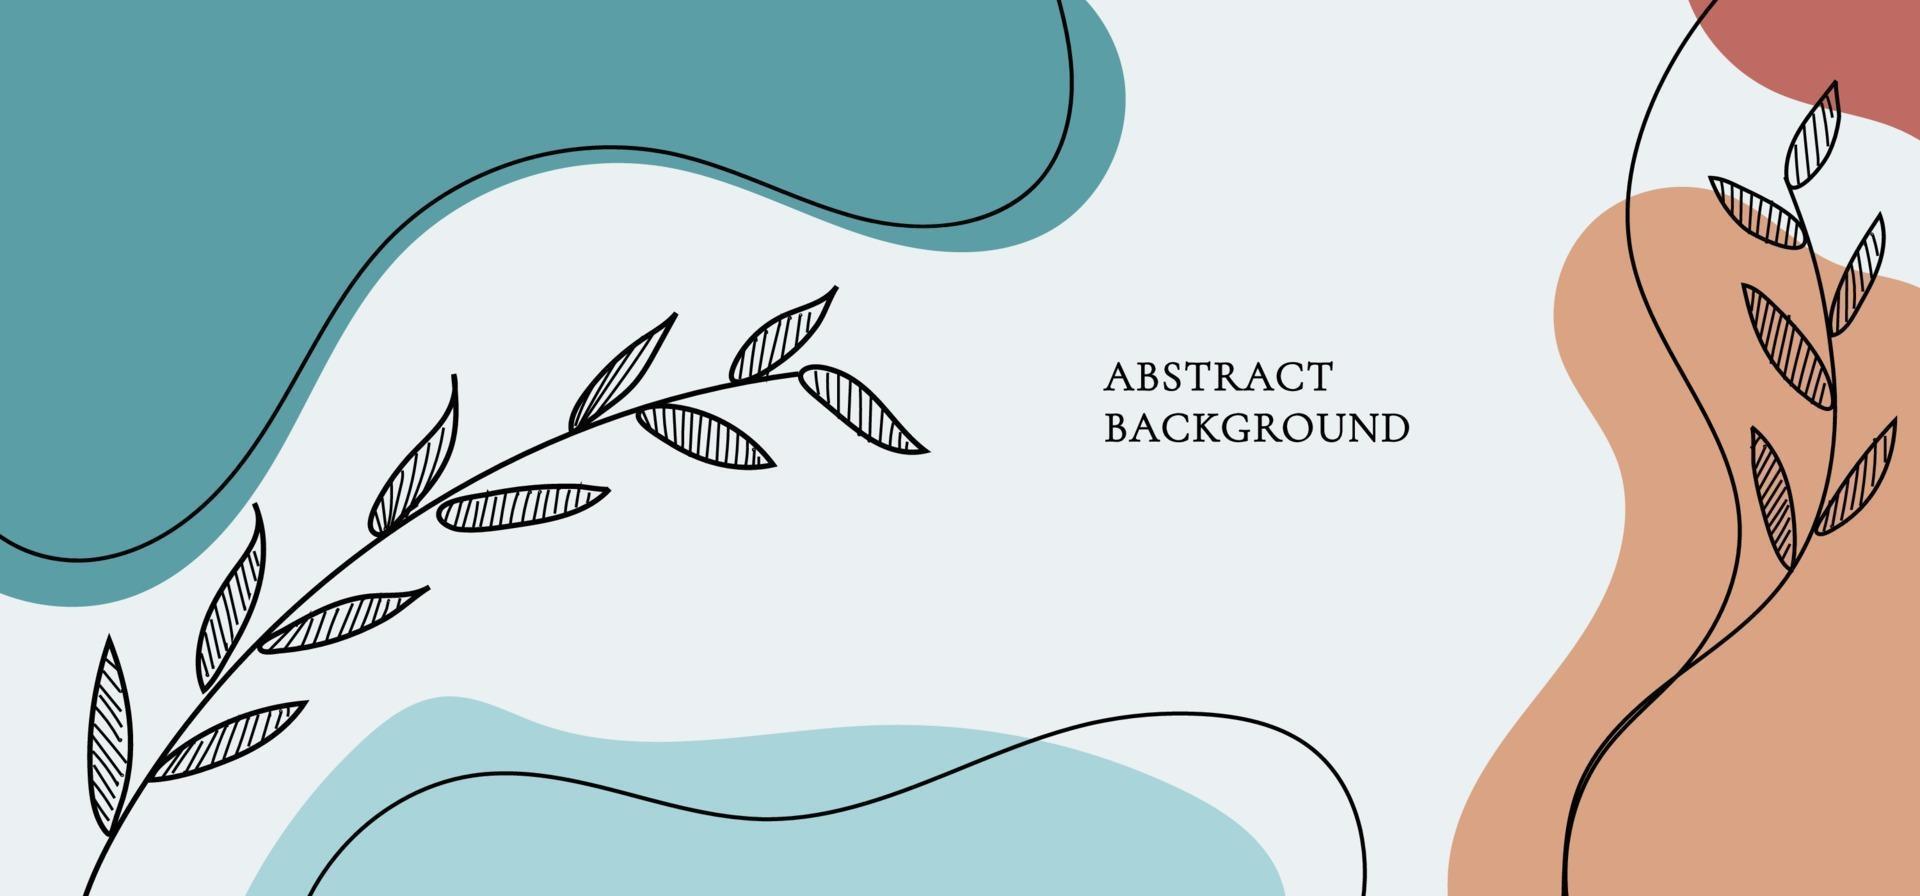 Banner web design template background with colored organic shapes, line art leaves. vector